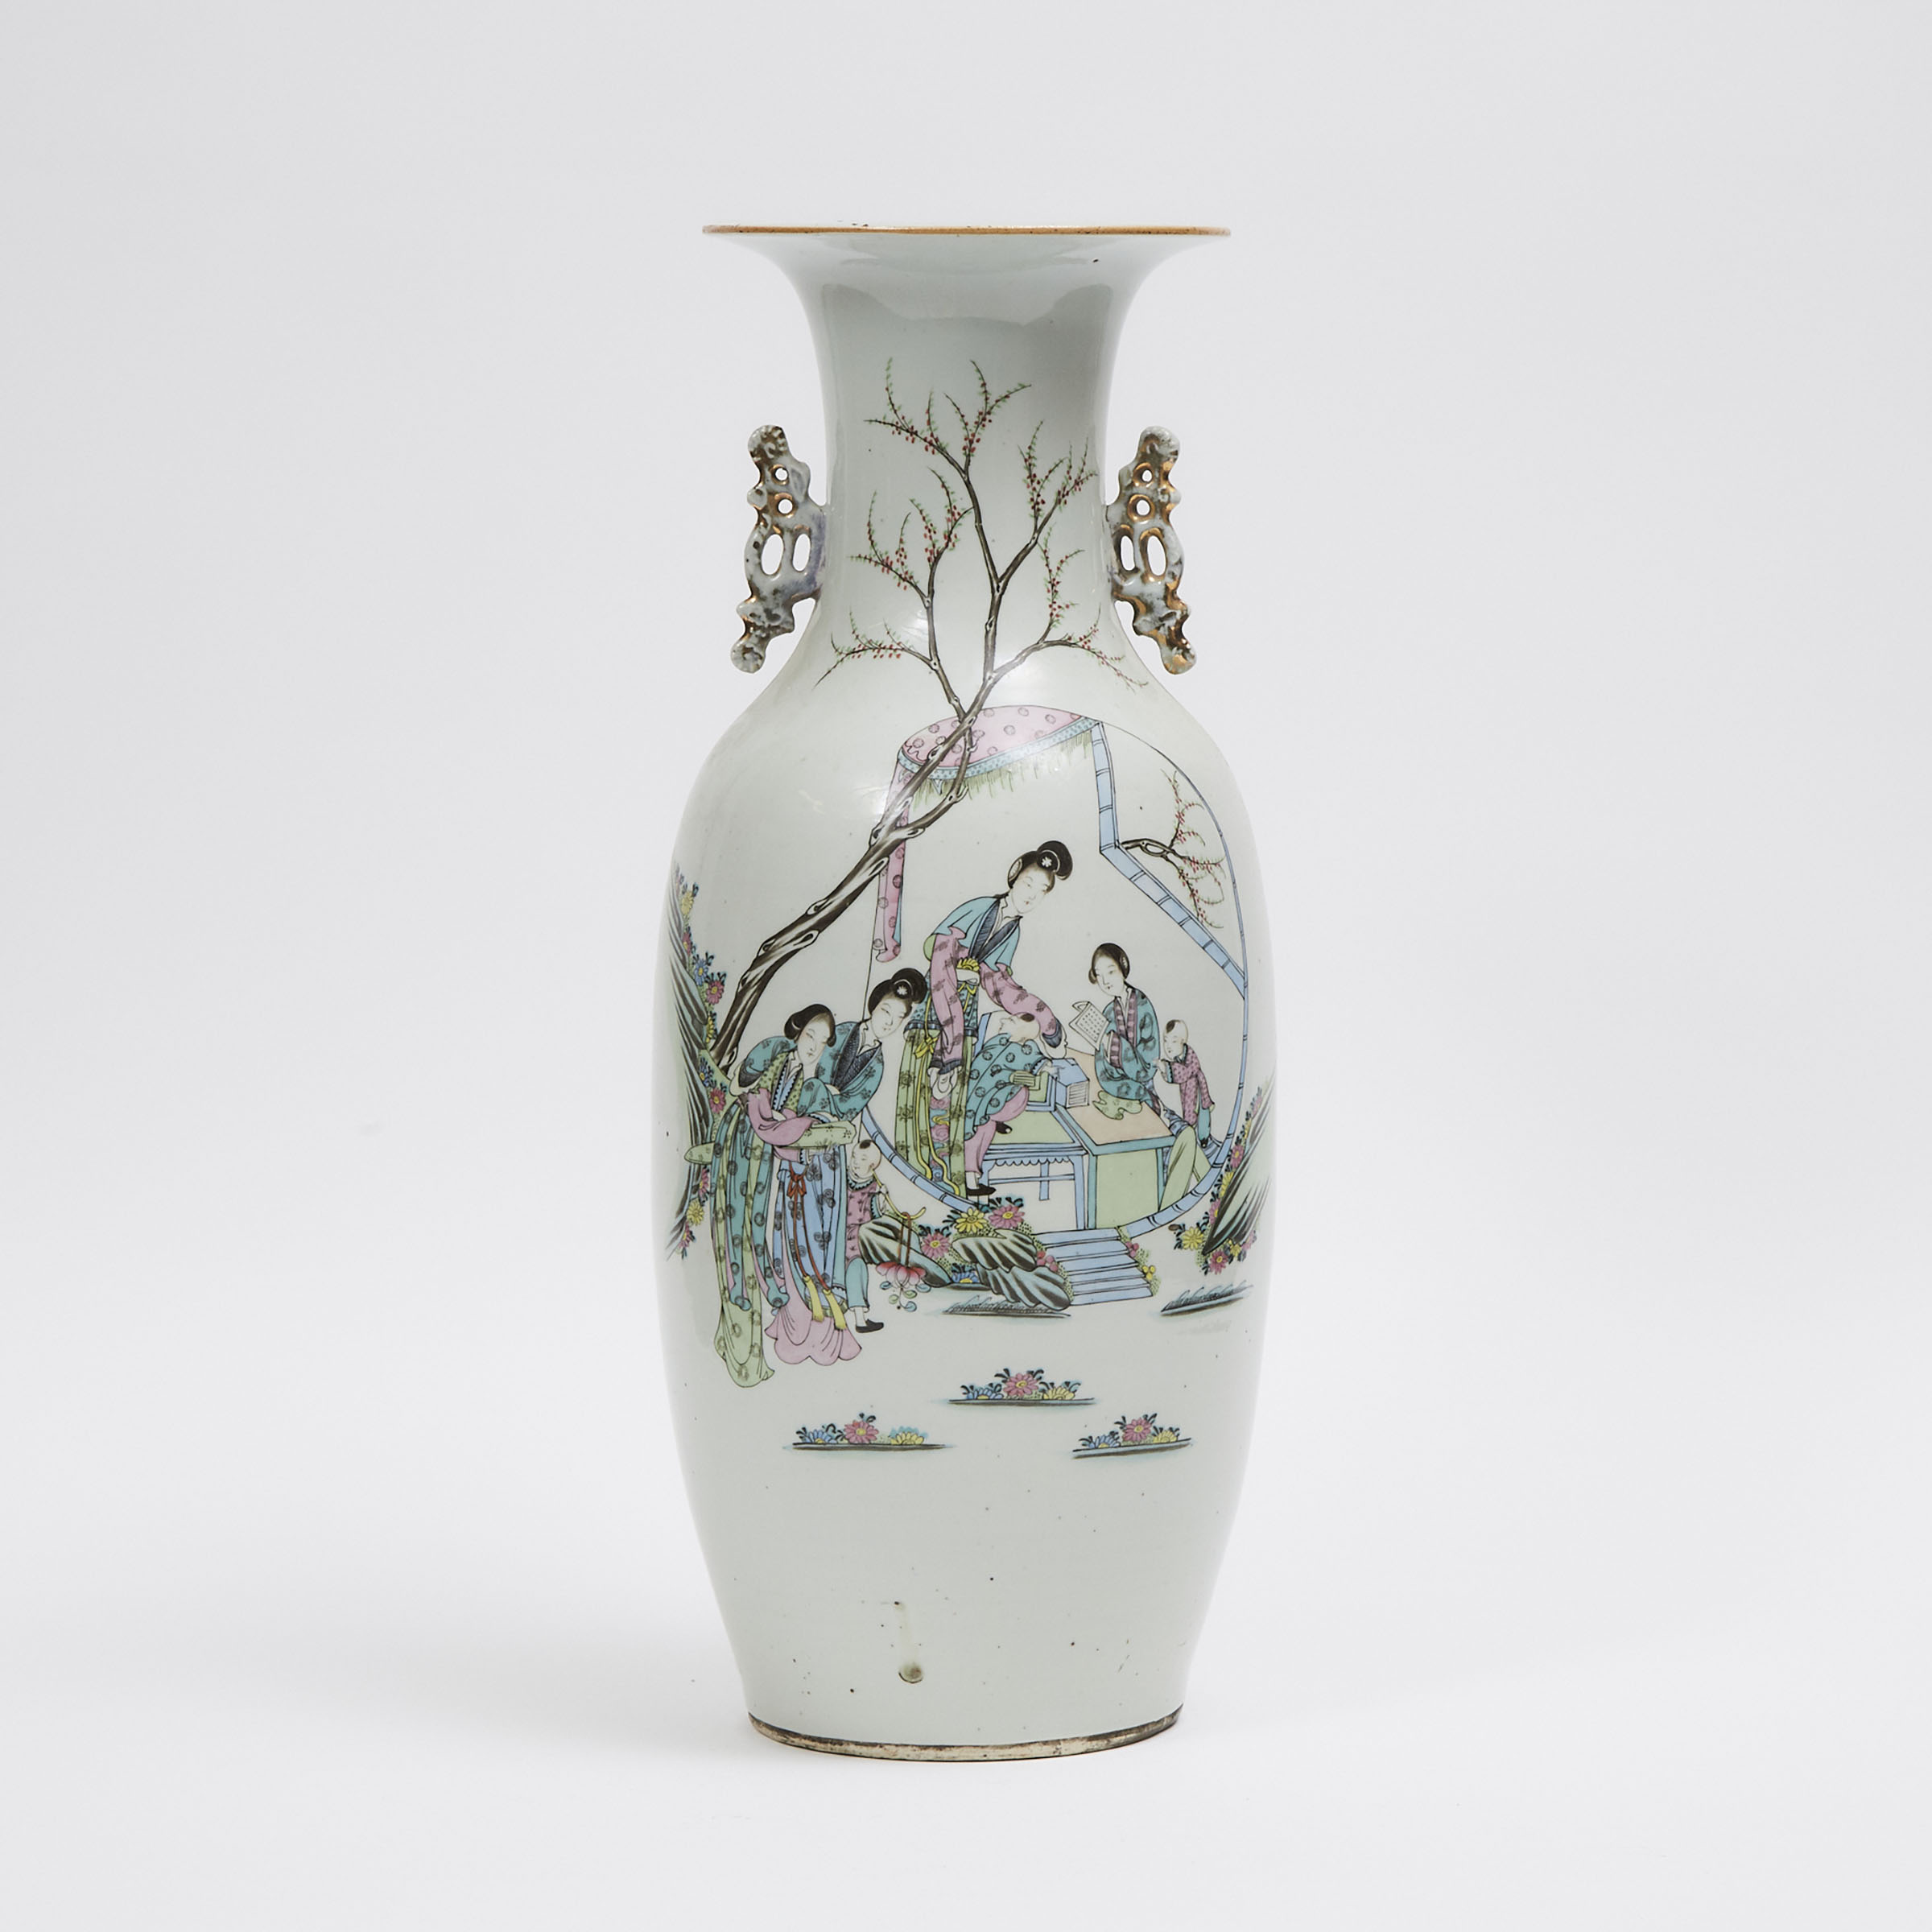 A Large Polychrome Enameled Porcelain Vase with Figures and Calligraphy